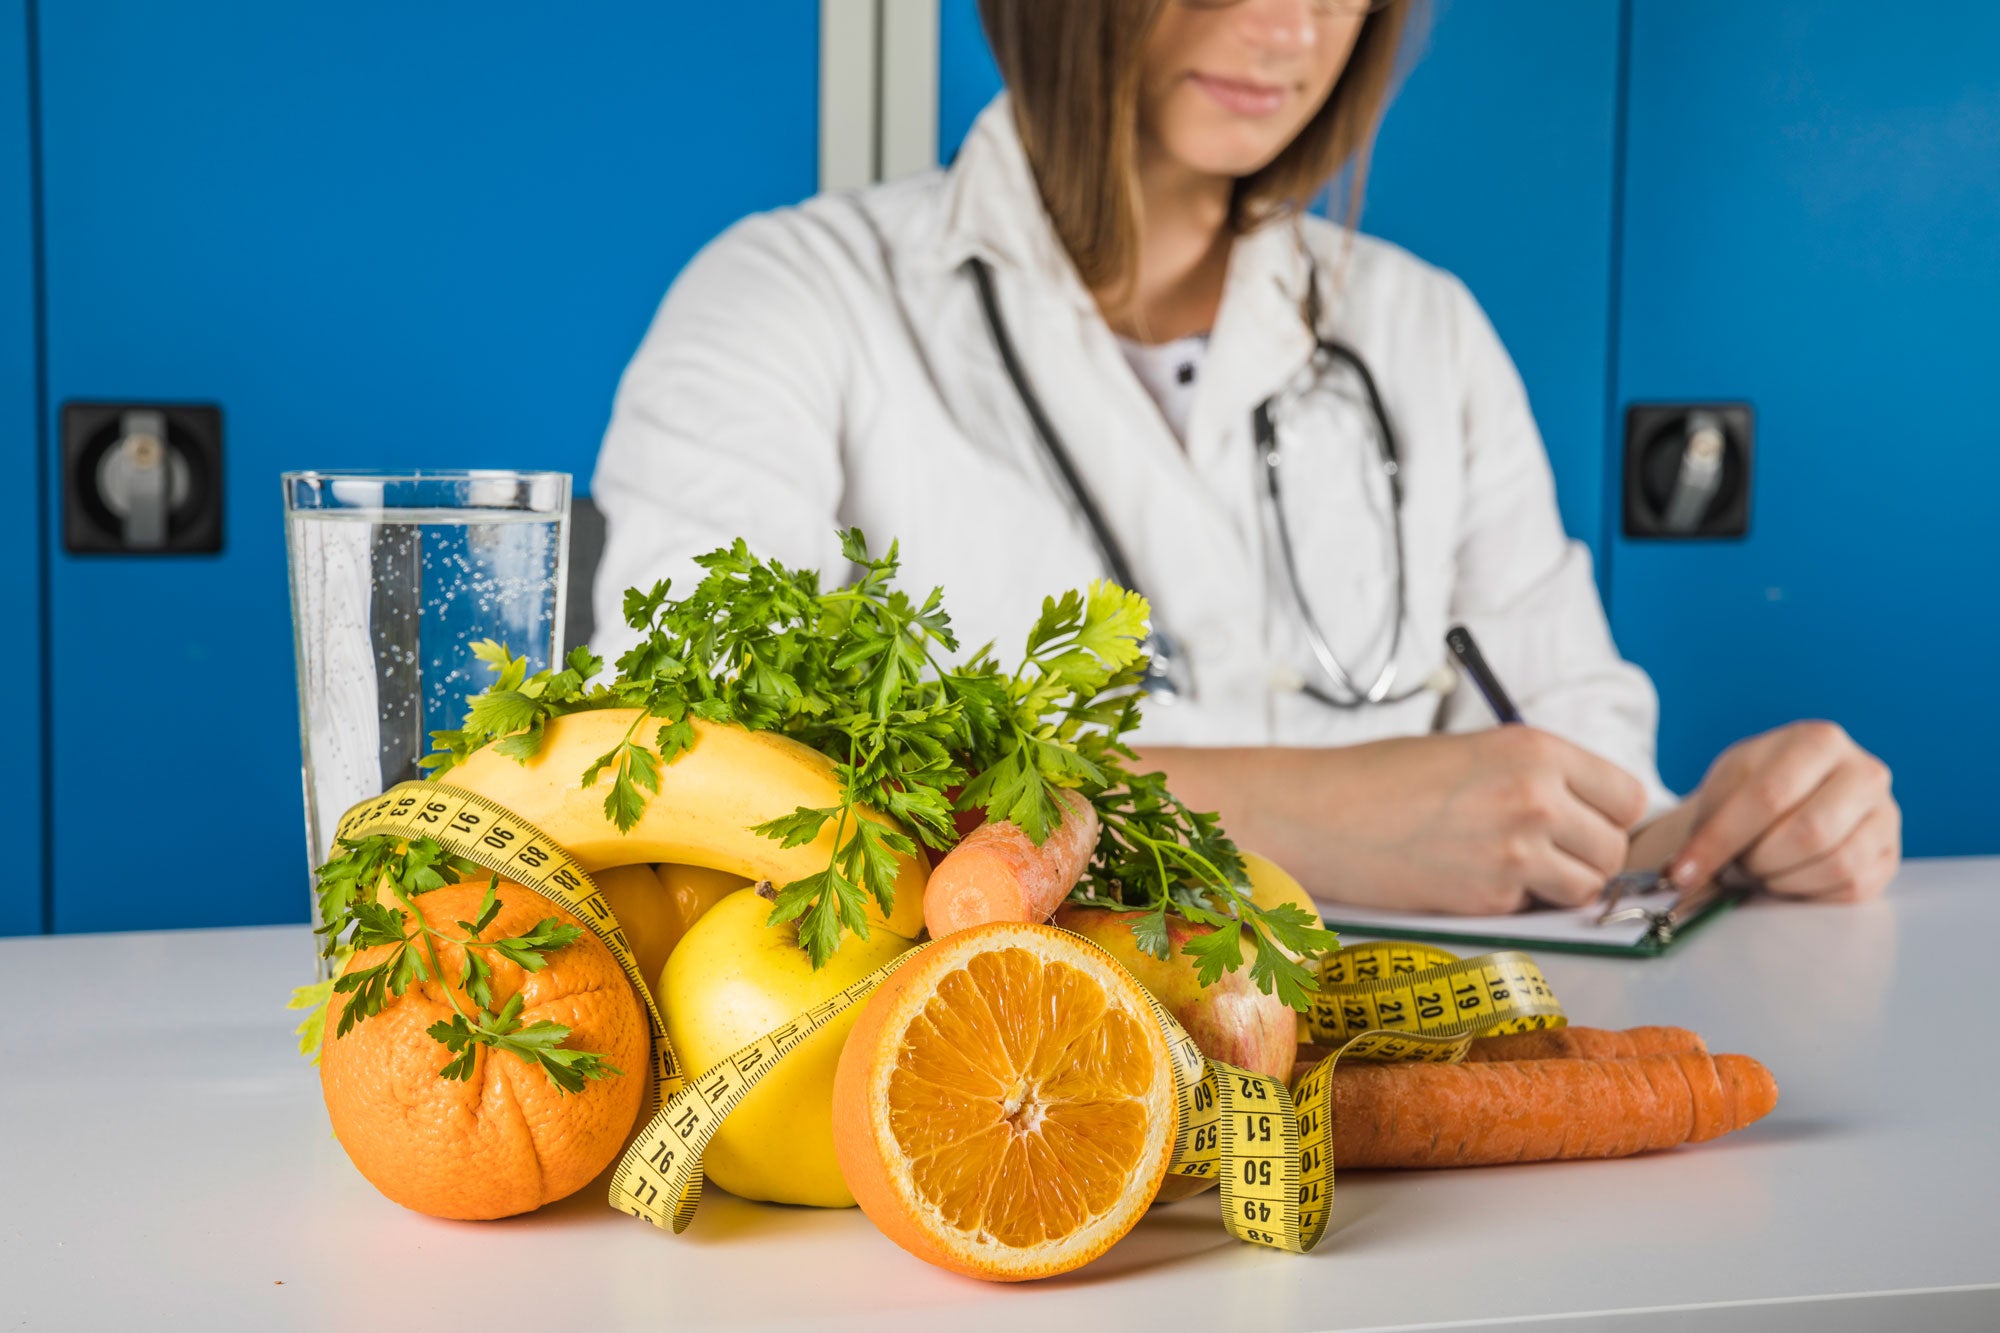 Image of a female Doctor writing in a paper on the white kitchen top. In front of her is a glass of water and fruits like oranges, banana, lemon, carrots, and vegetables like carrot and parsley with a measuring tape along with the foods. 